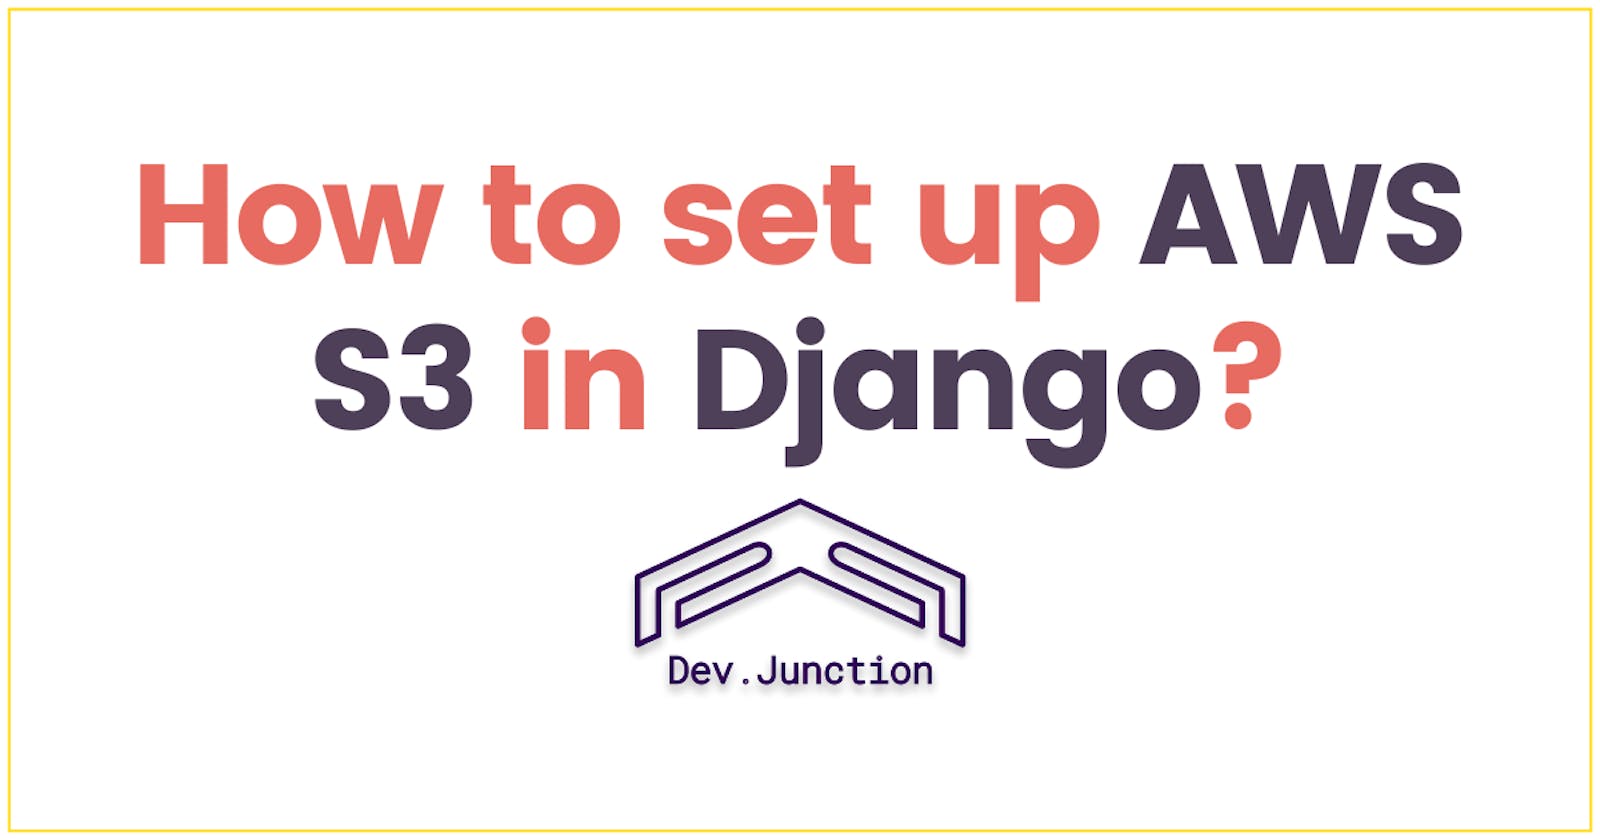 How to set up AWS S3 in Django?